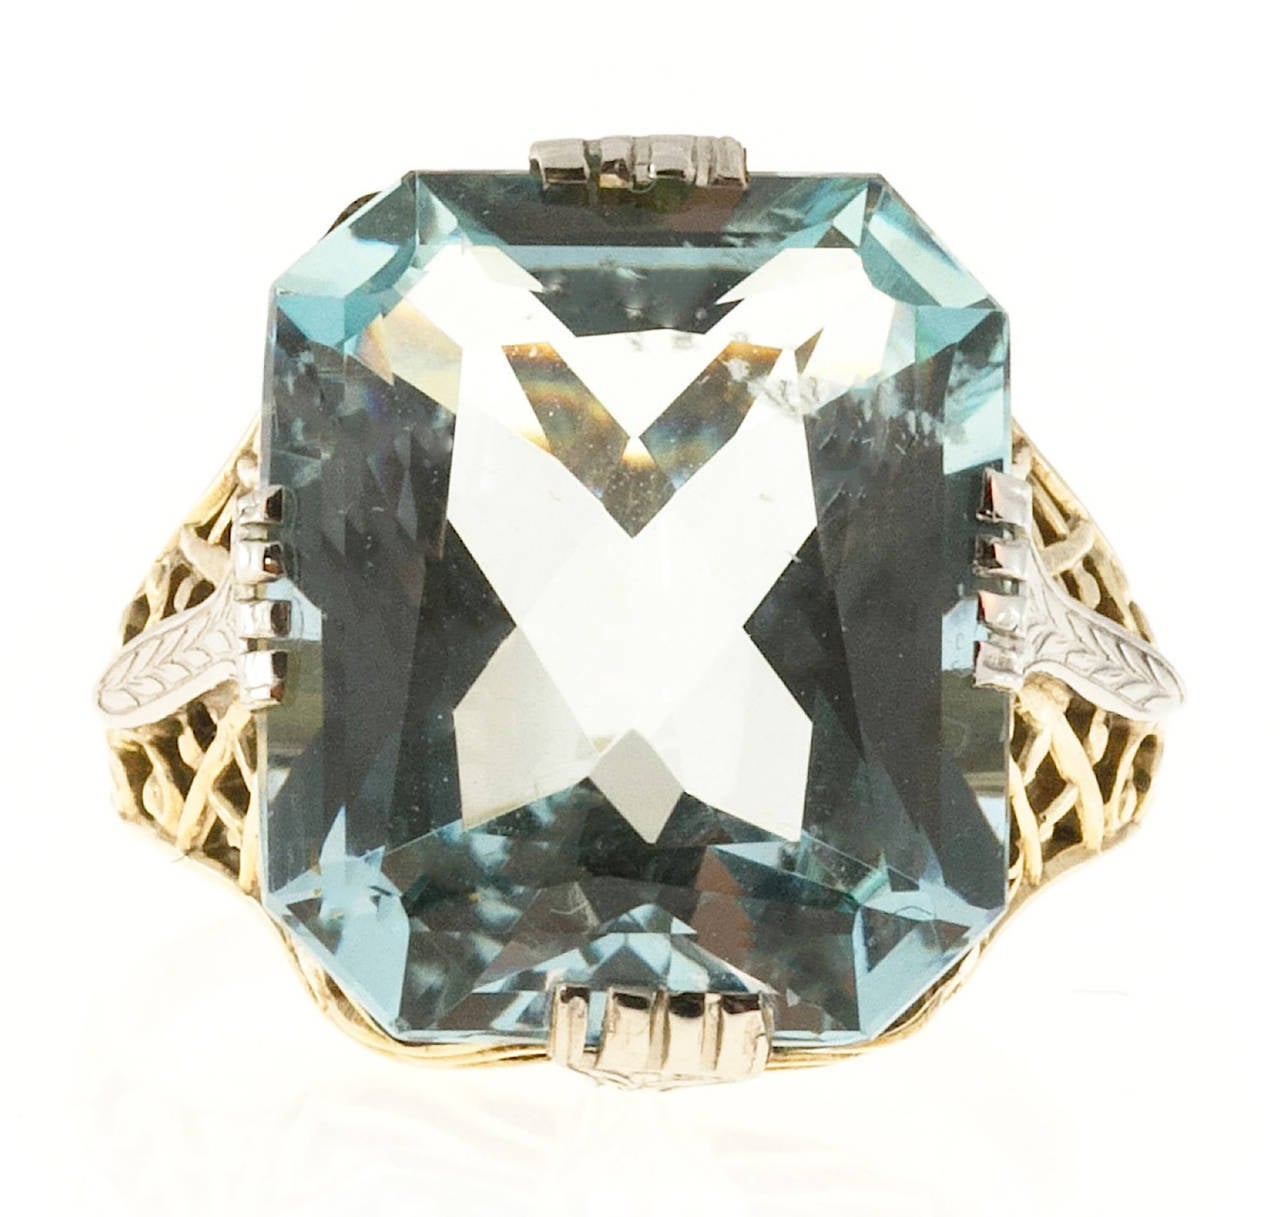 Totally original filigree 10k yellow and white gold ring with natural untreated 7.13ct  Emerald cut Aqua.

1 Emerald cut natural light greenish blue Aqua, approx. total weight 7.13cts, VS, 13.7 x 11.5mm
3.0 grams
Tested and stamped: 10k
Width